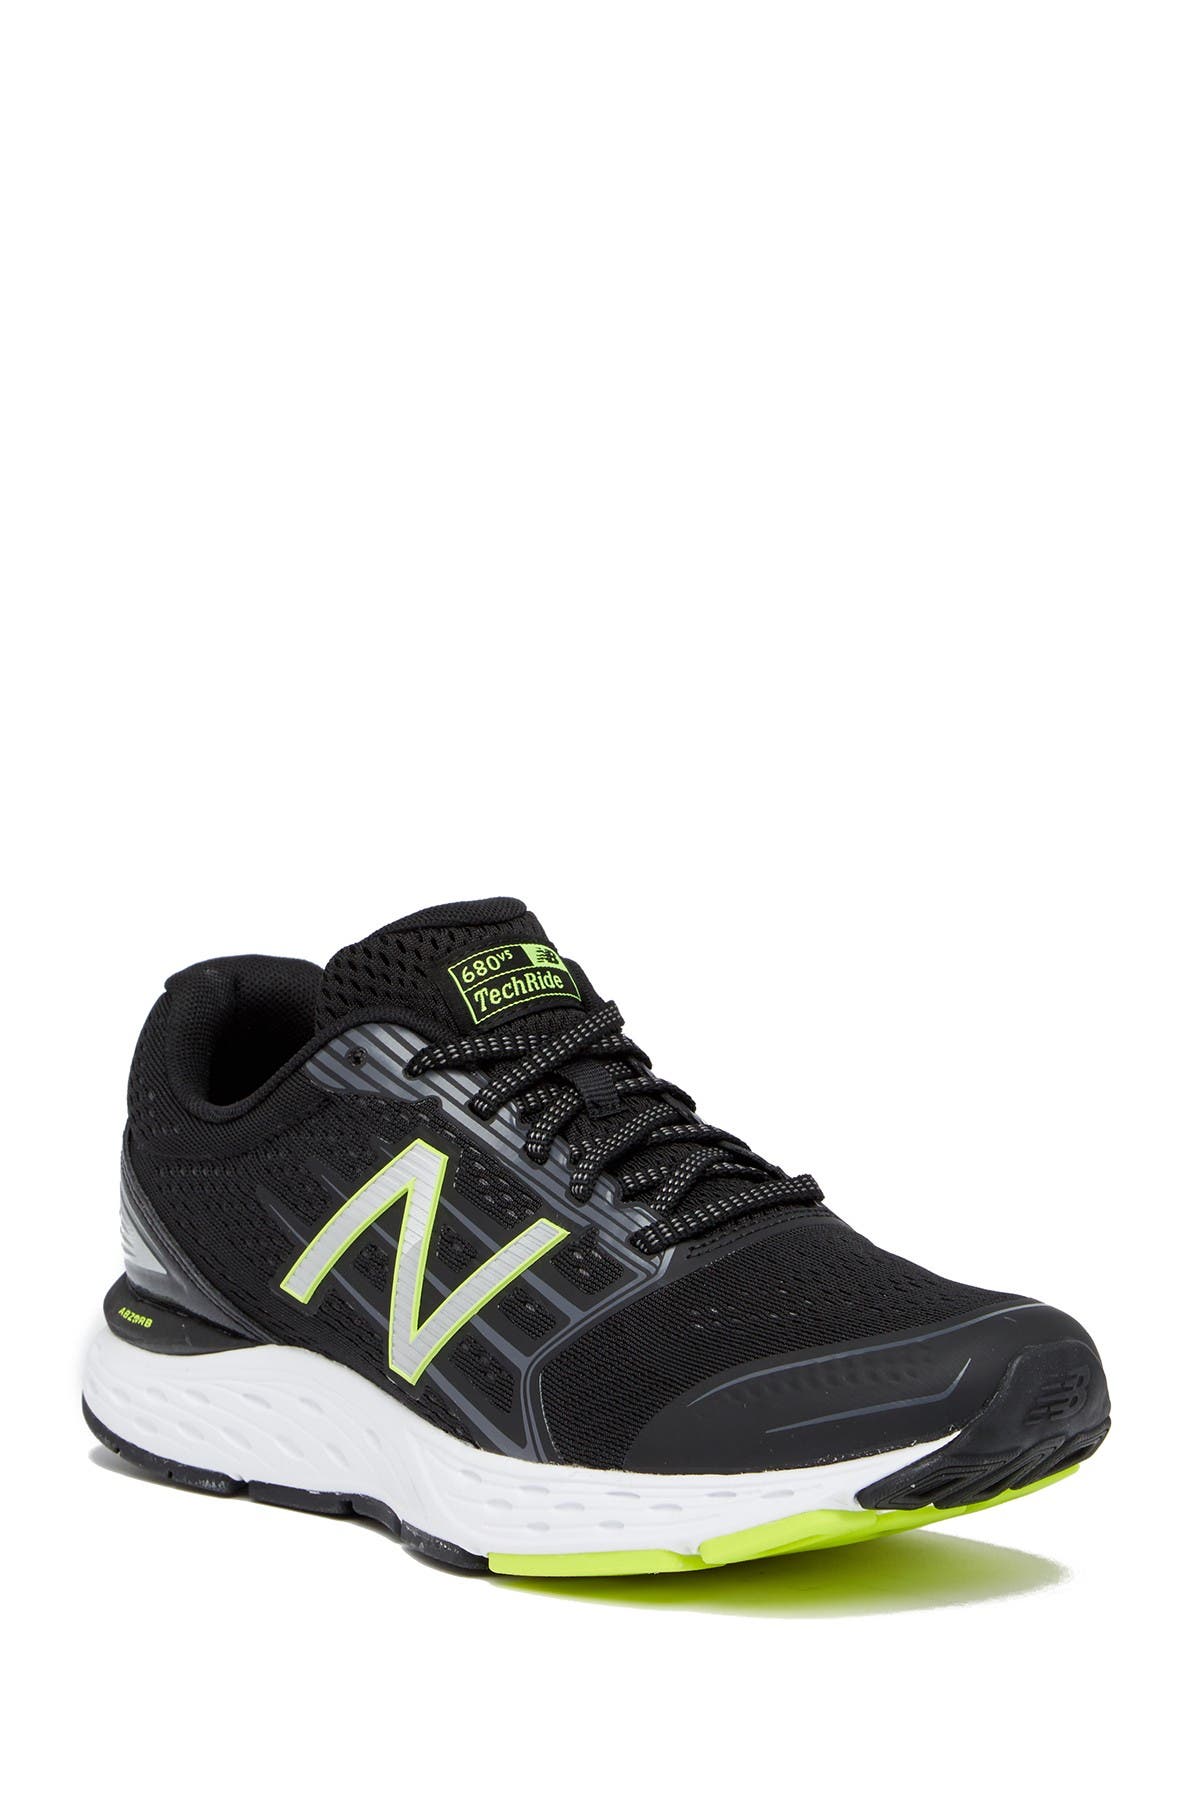 extra wide new balance womens shoes